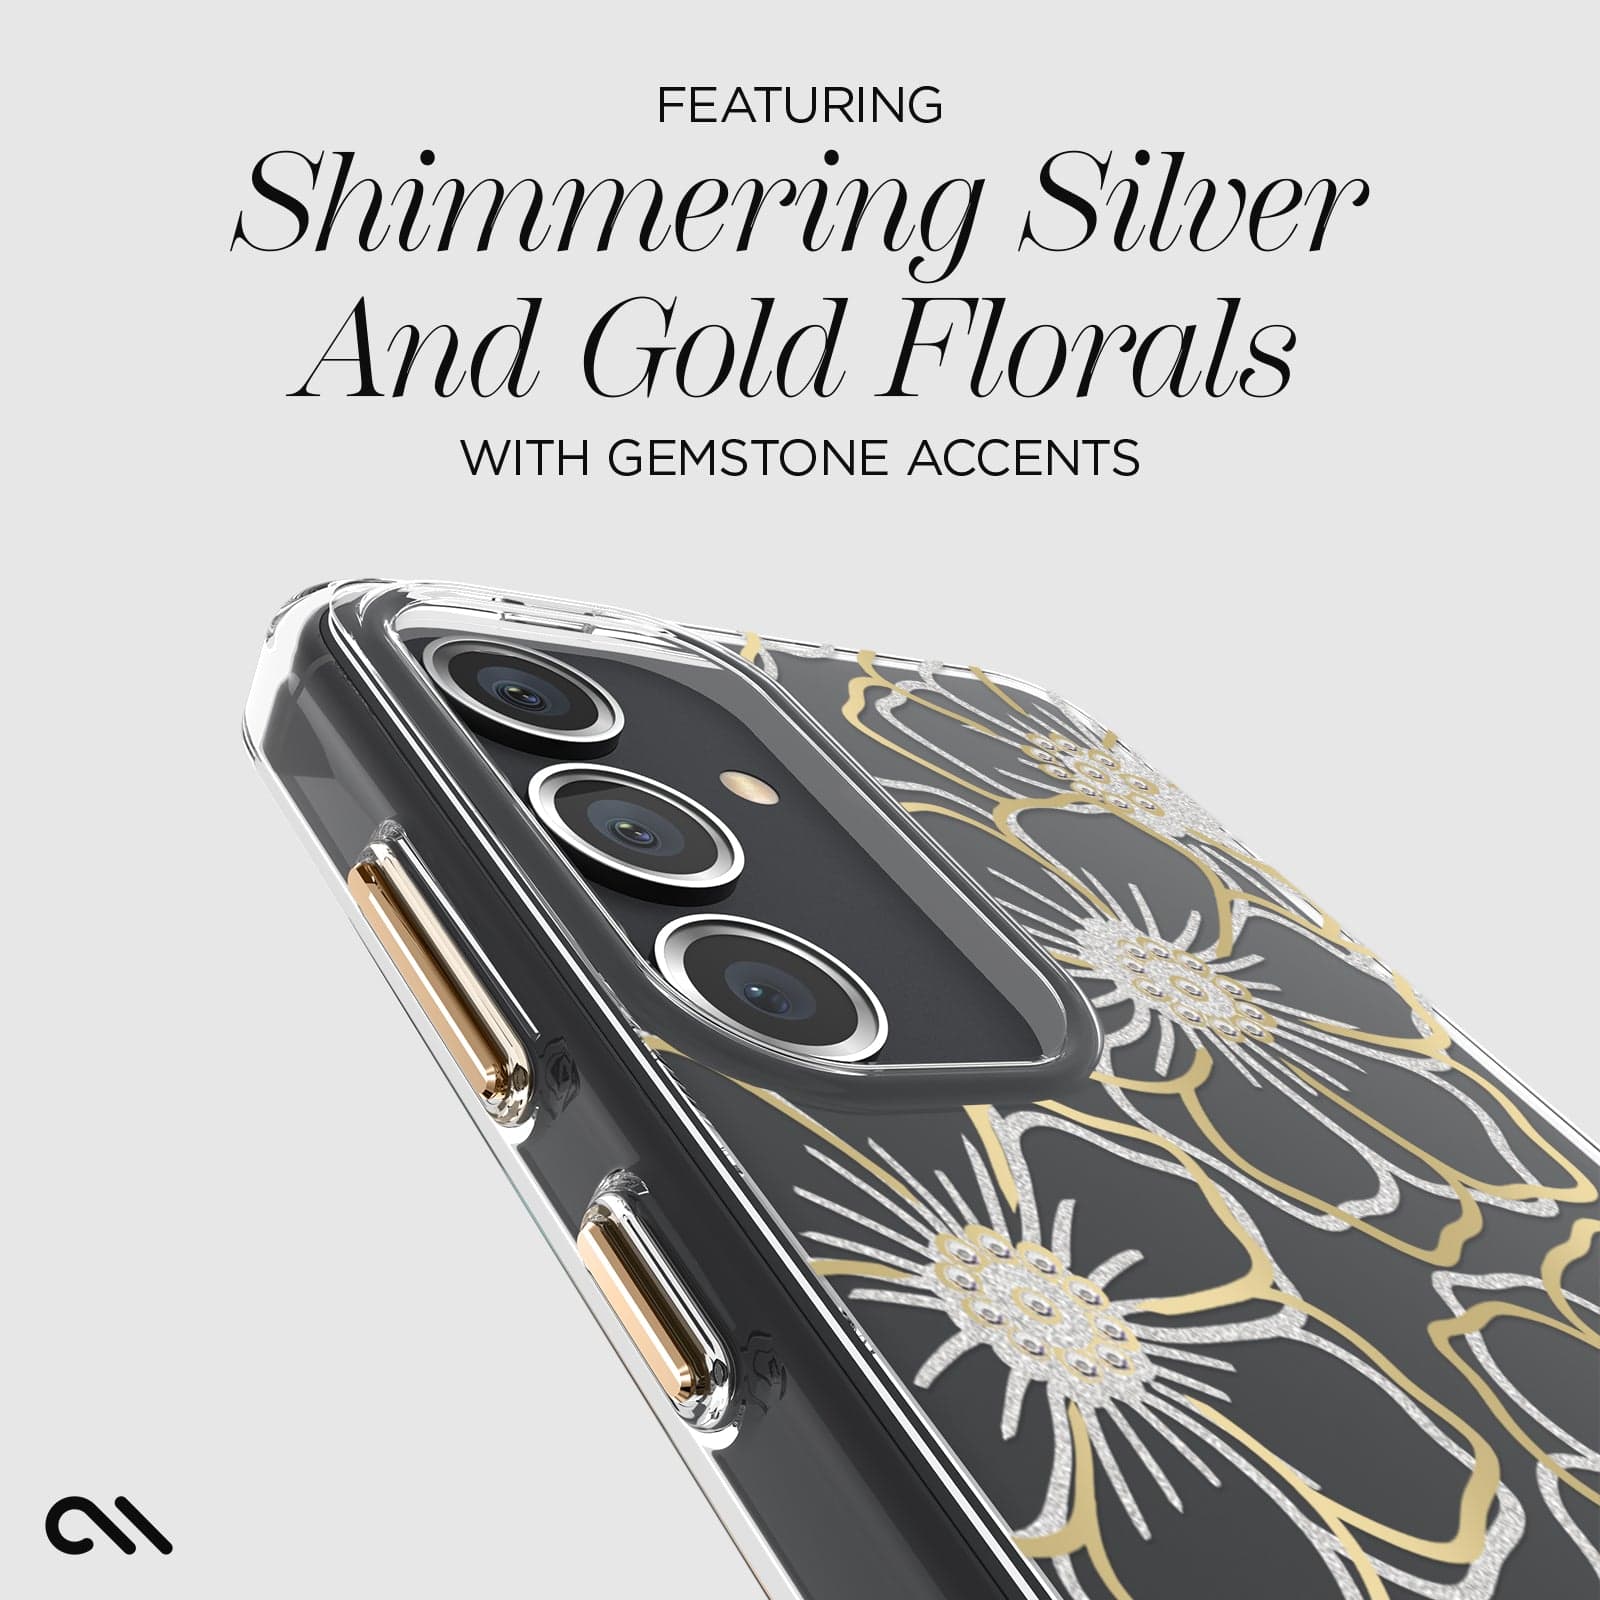 FEATURING SHIMMERING SILVER AND GOLD FLORALS WITH GEMSTONE ACCENTS